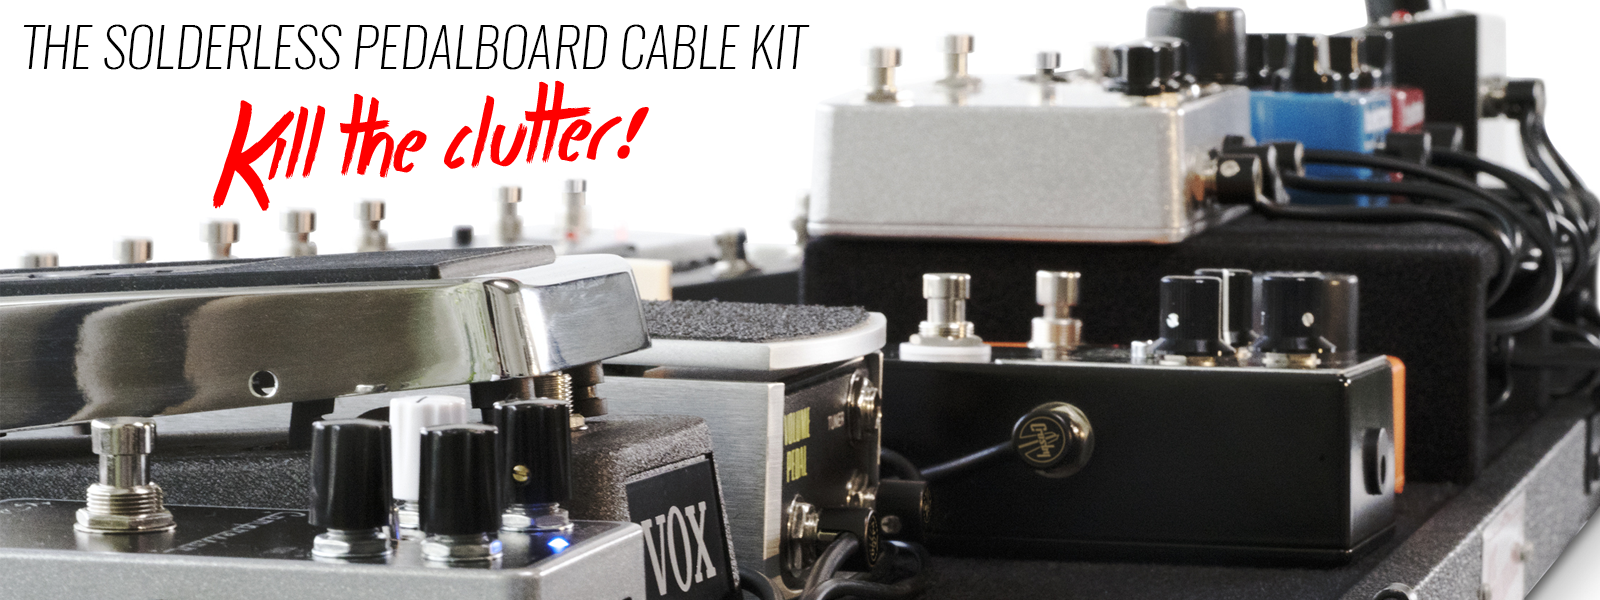 The Solderless Pedalboard Cable Kit